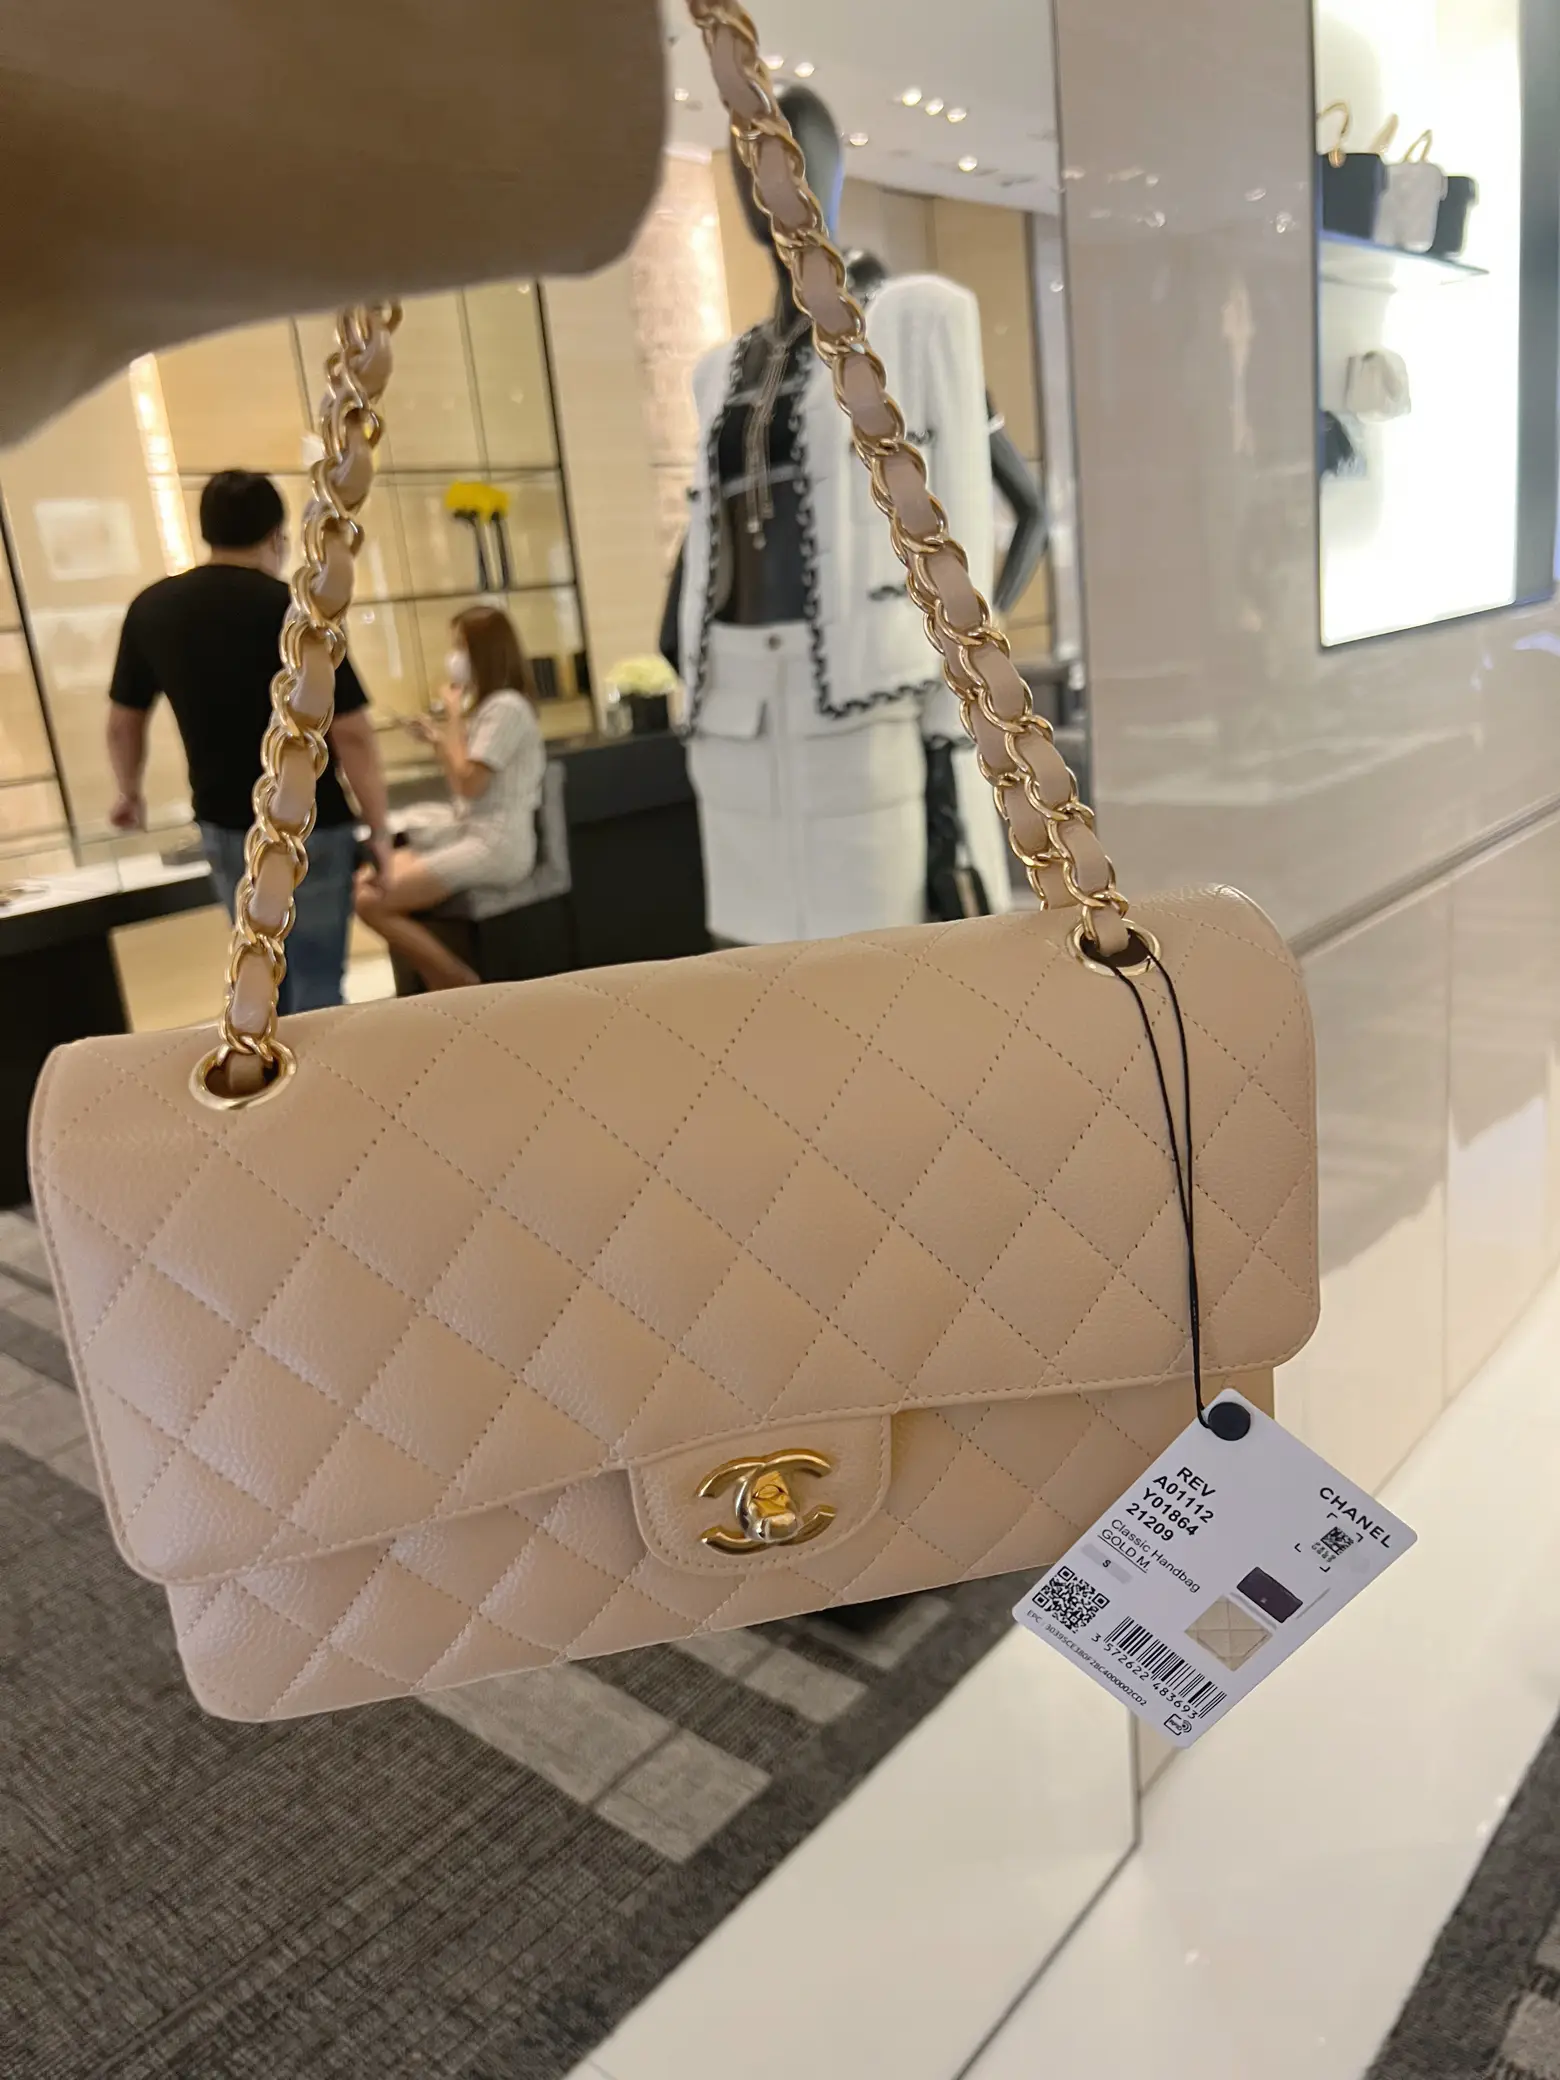 $9600 CHANEL Classic small double Flap Bag pink caviar gold hw 22